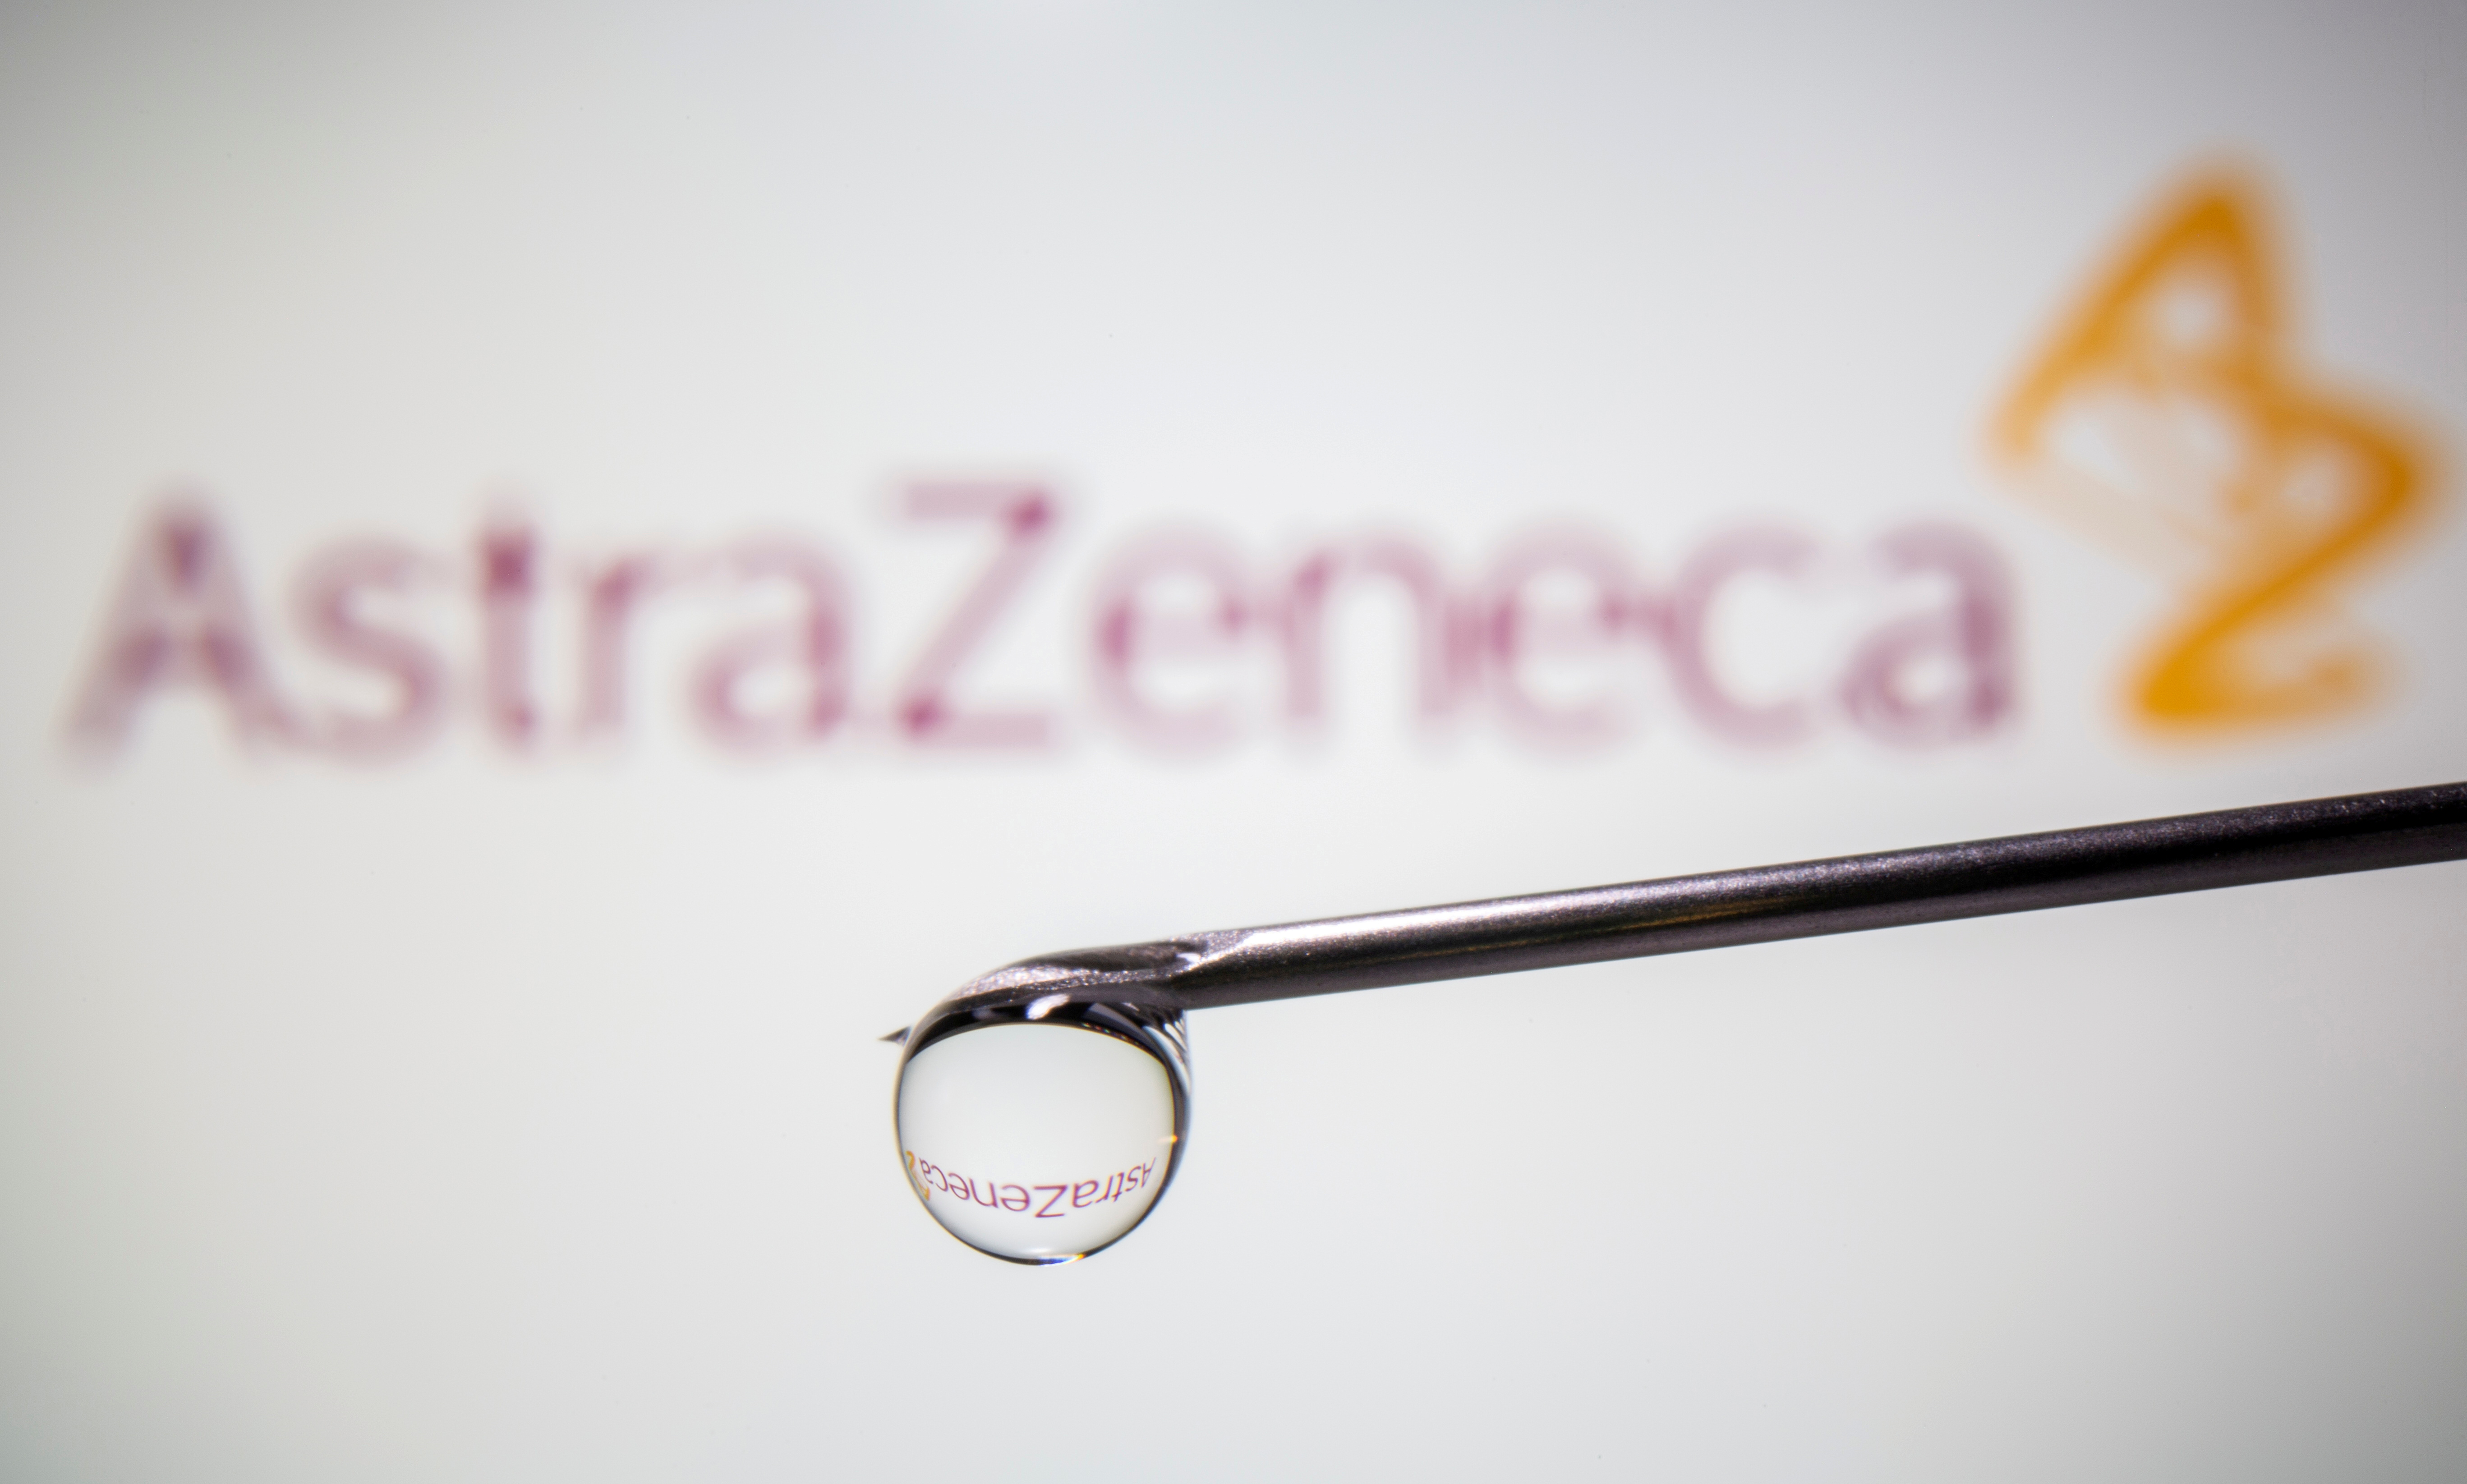 AstraZeneca's logo is reflected in a drop on a syringe needle in this illustration